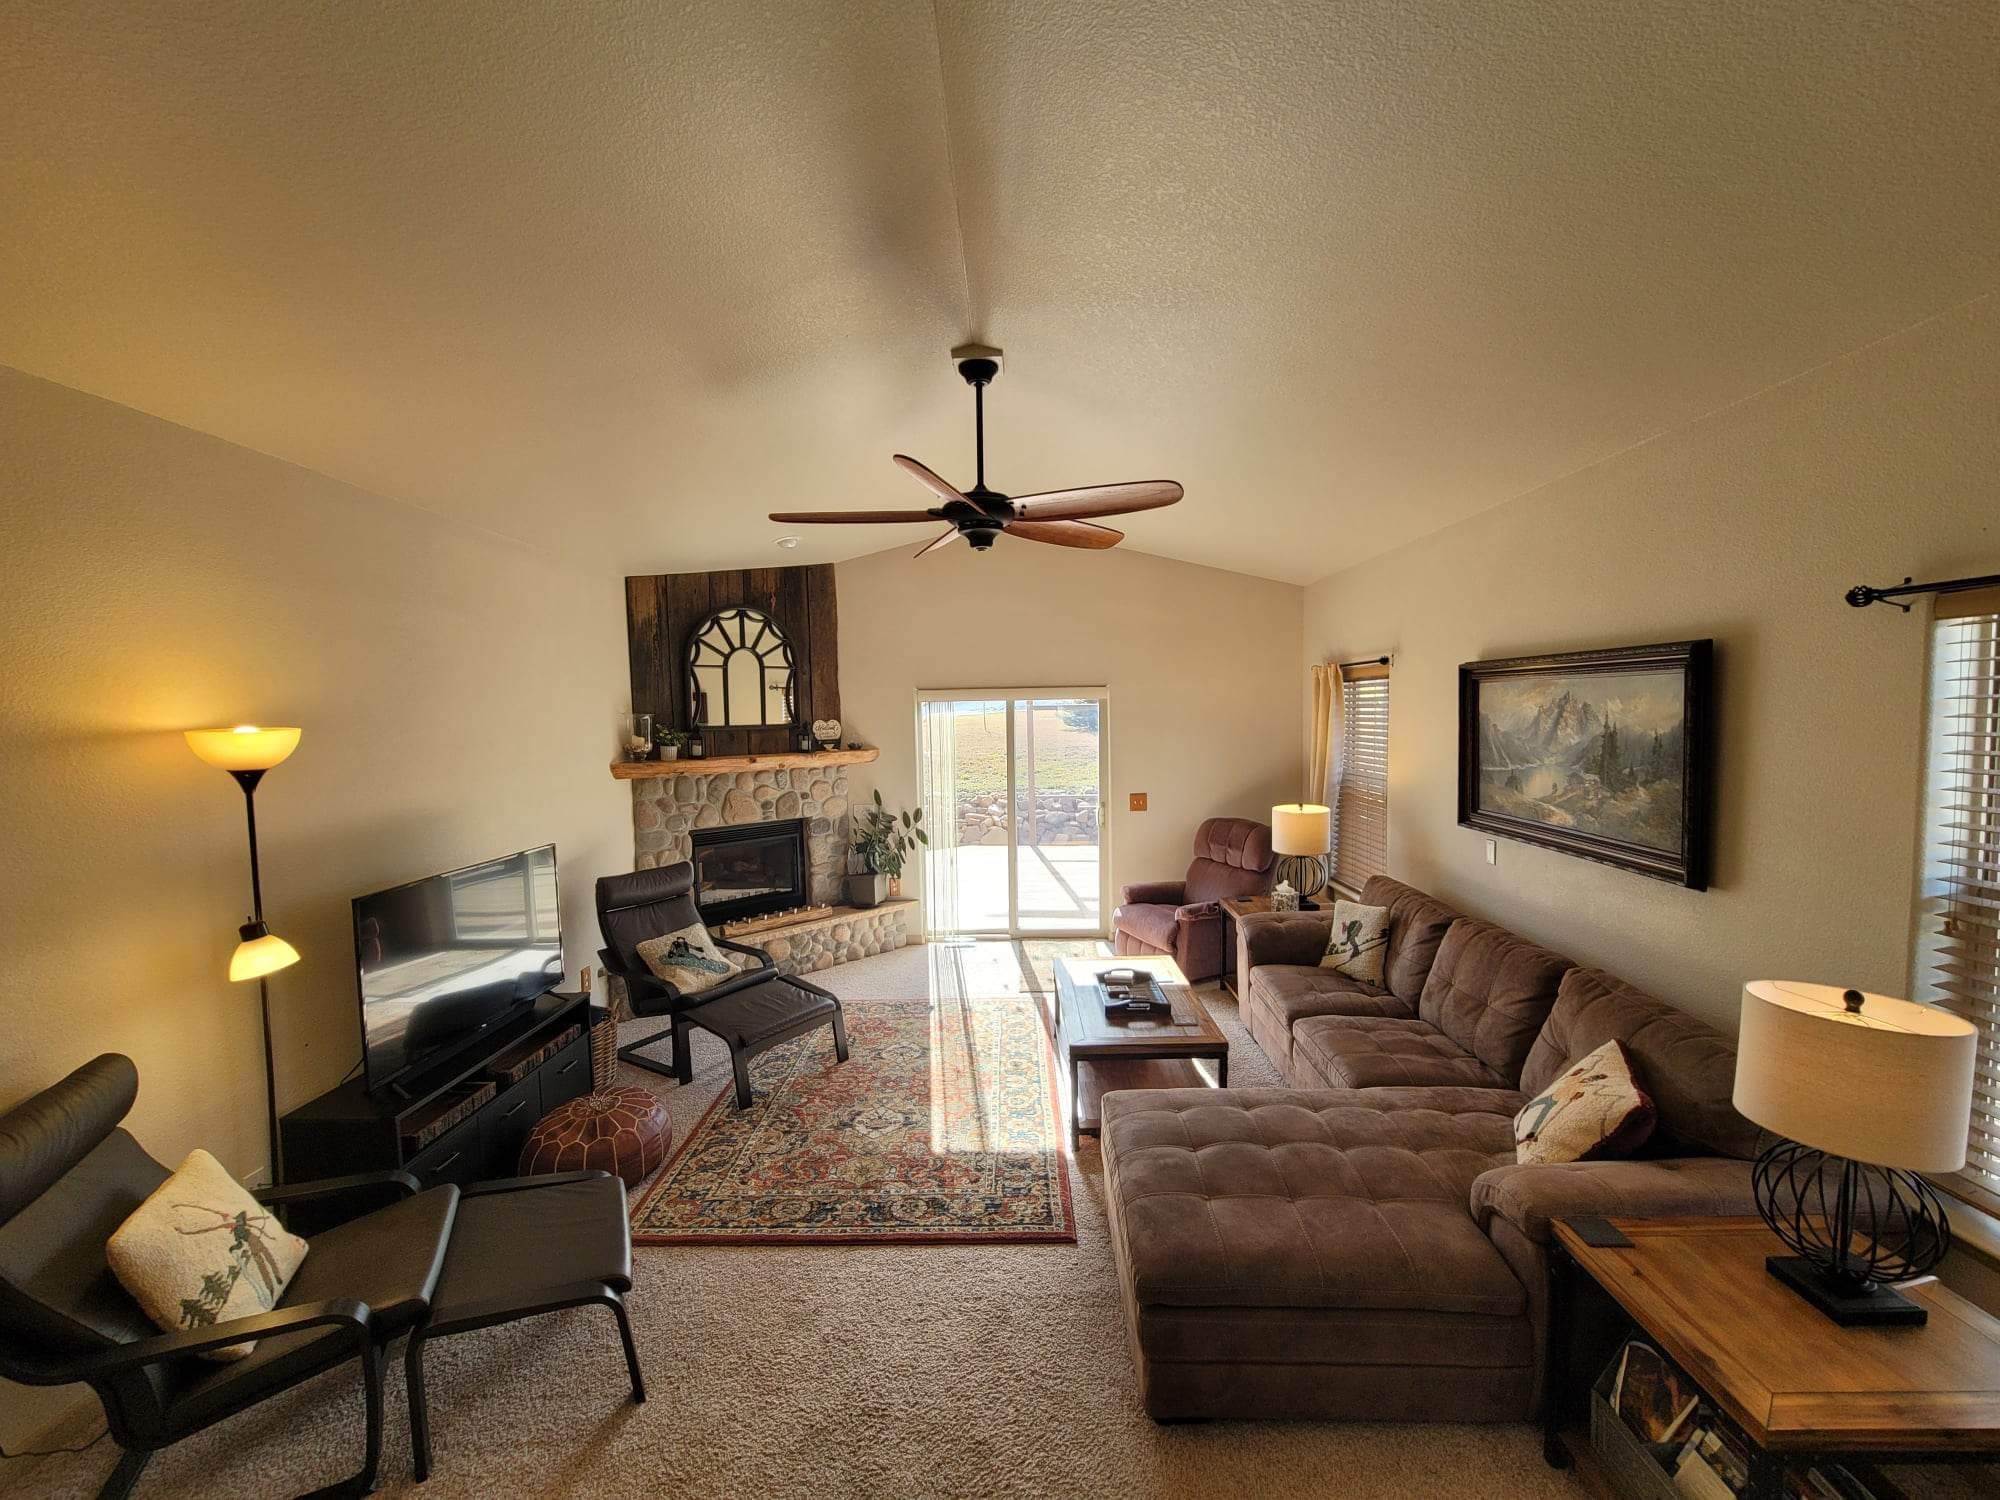 Perfect Pebble Place, #250 Pebble Cr. - MT, Pagosa Springs, CO 81147